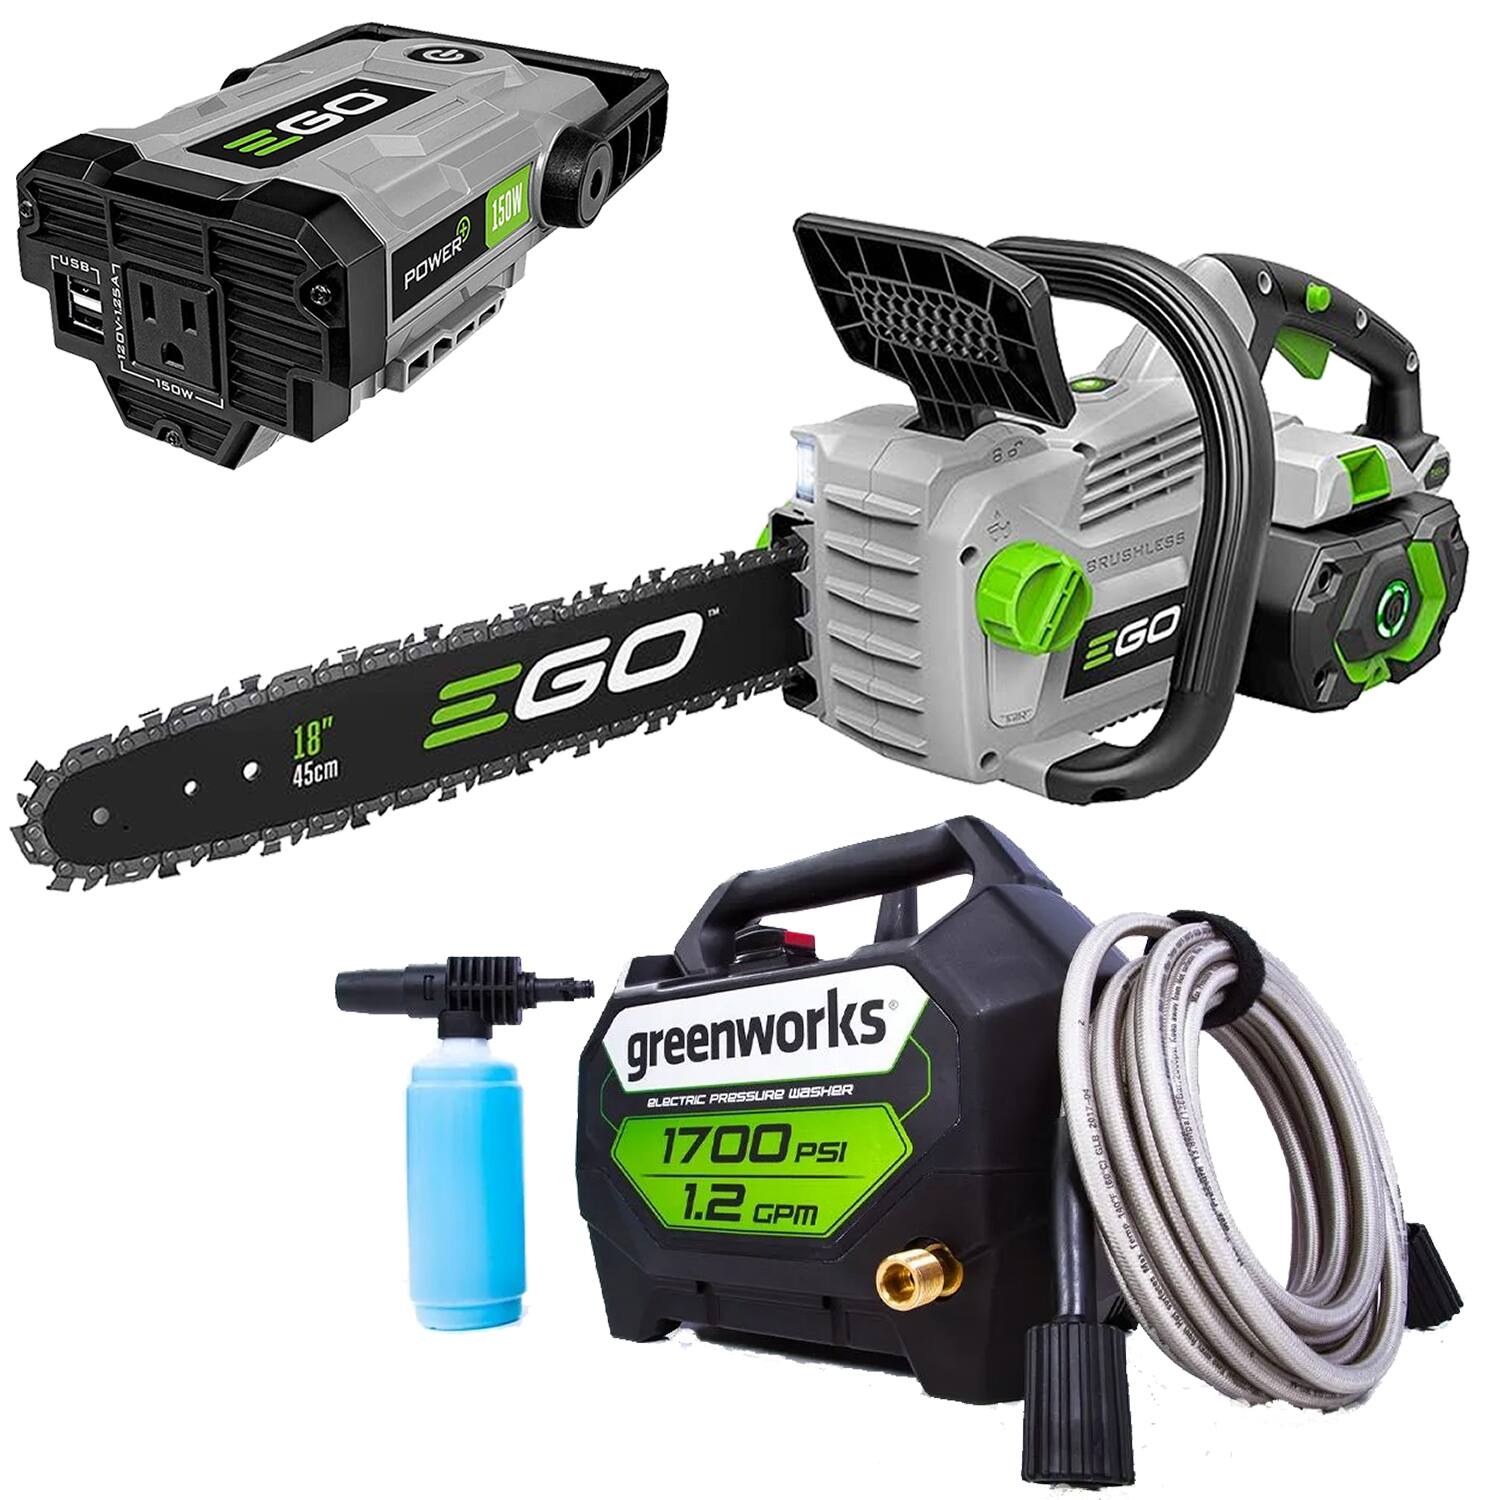 Up to 30% Off Outdoor Tools & Power Equipment at Lowe's: EGO Power+ 56-V 18-in Brushless Chainsaw Kit $319 & More